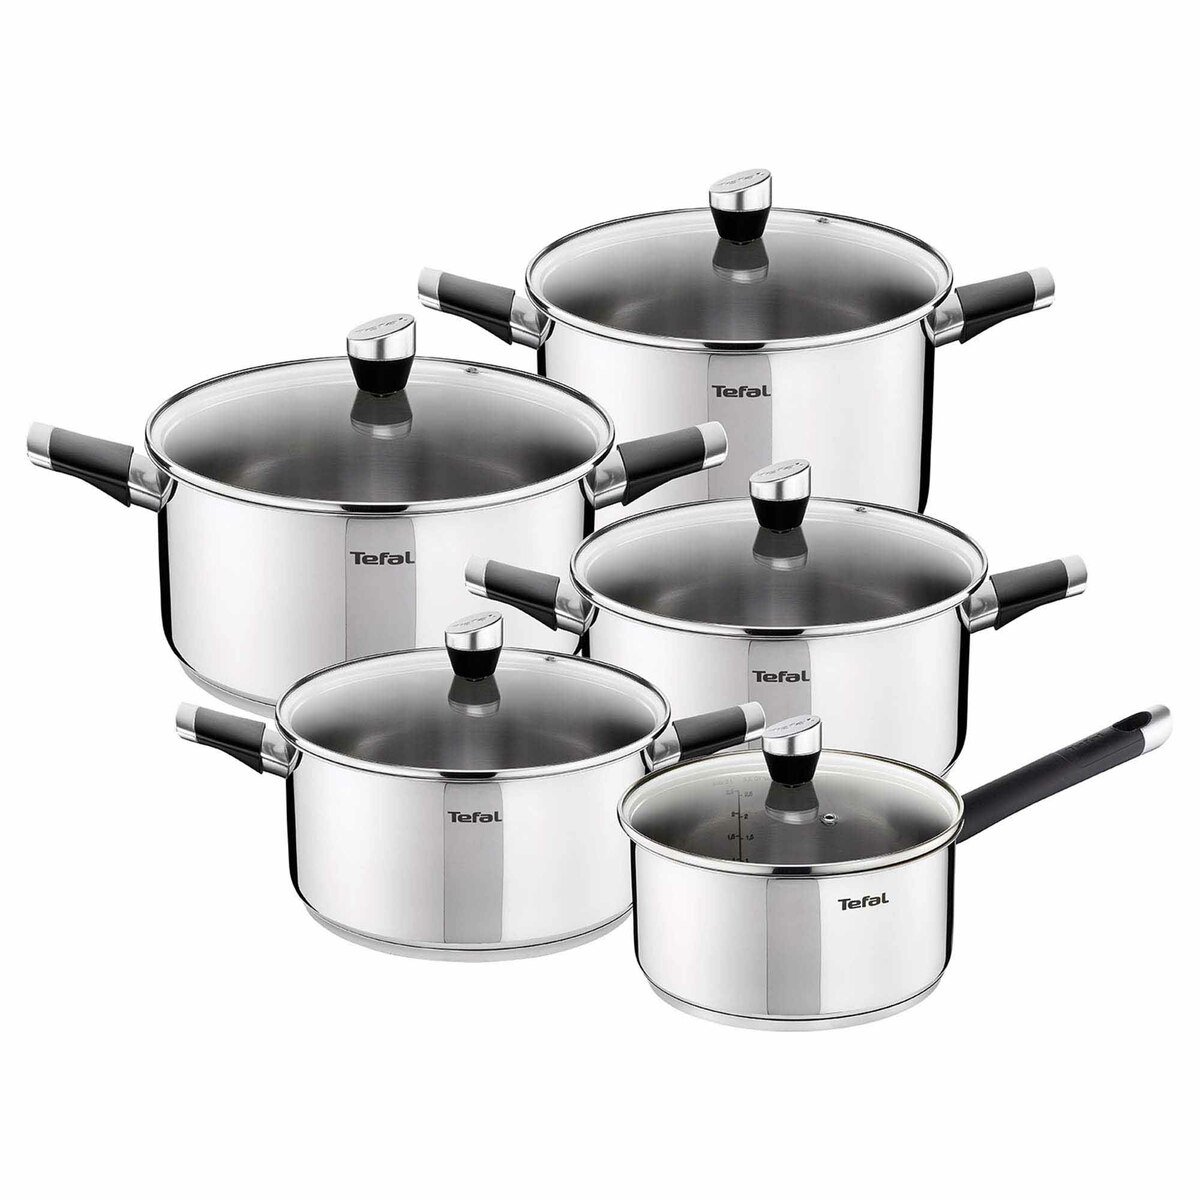 Tefal Stainless Steel Cookware Set Emotion 10pcs